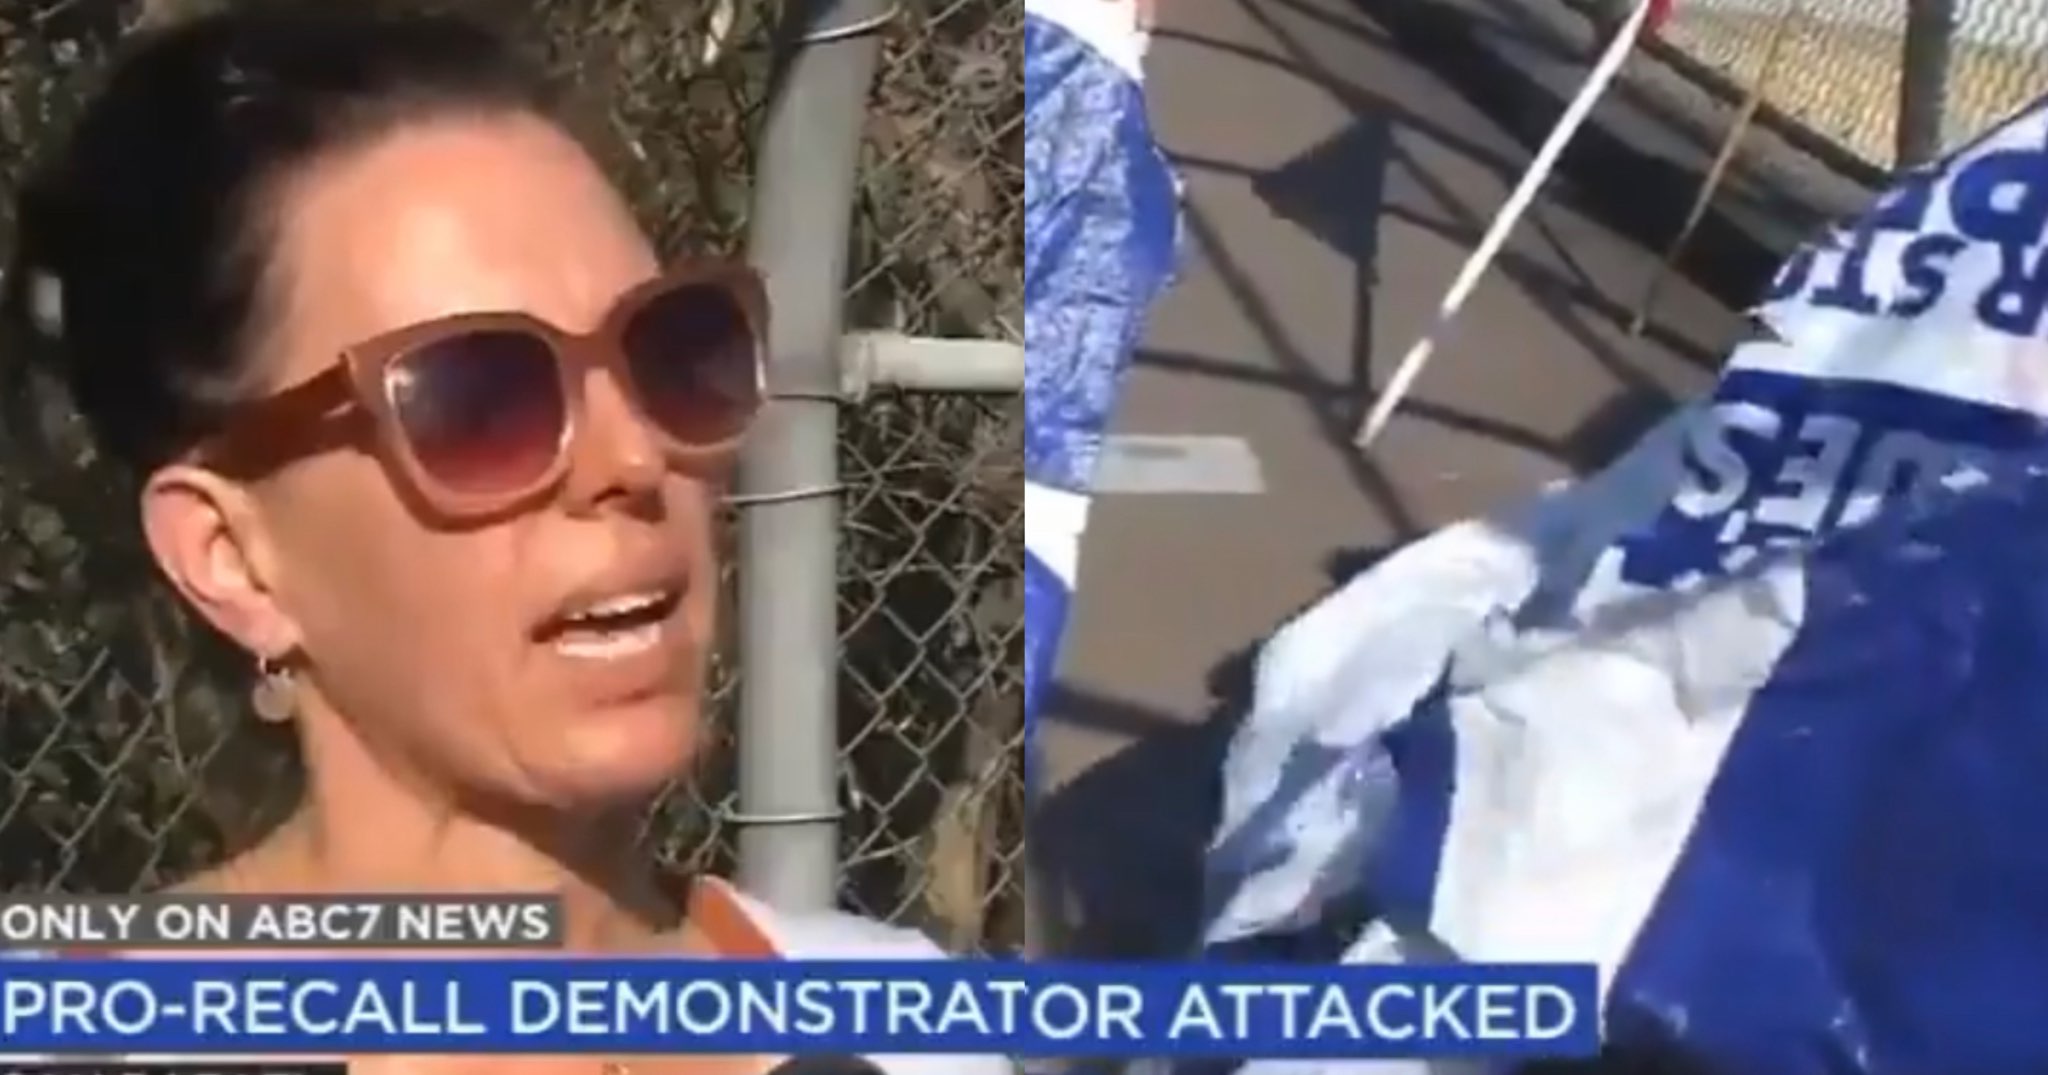 Violent Leftist Wielding Knife Breaks Jaw and Fractures Skull of Pro-Recall Activist in California Ahead of Election - Media Right News